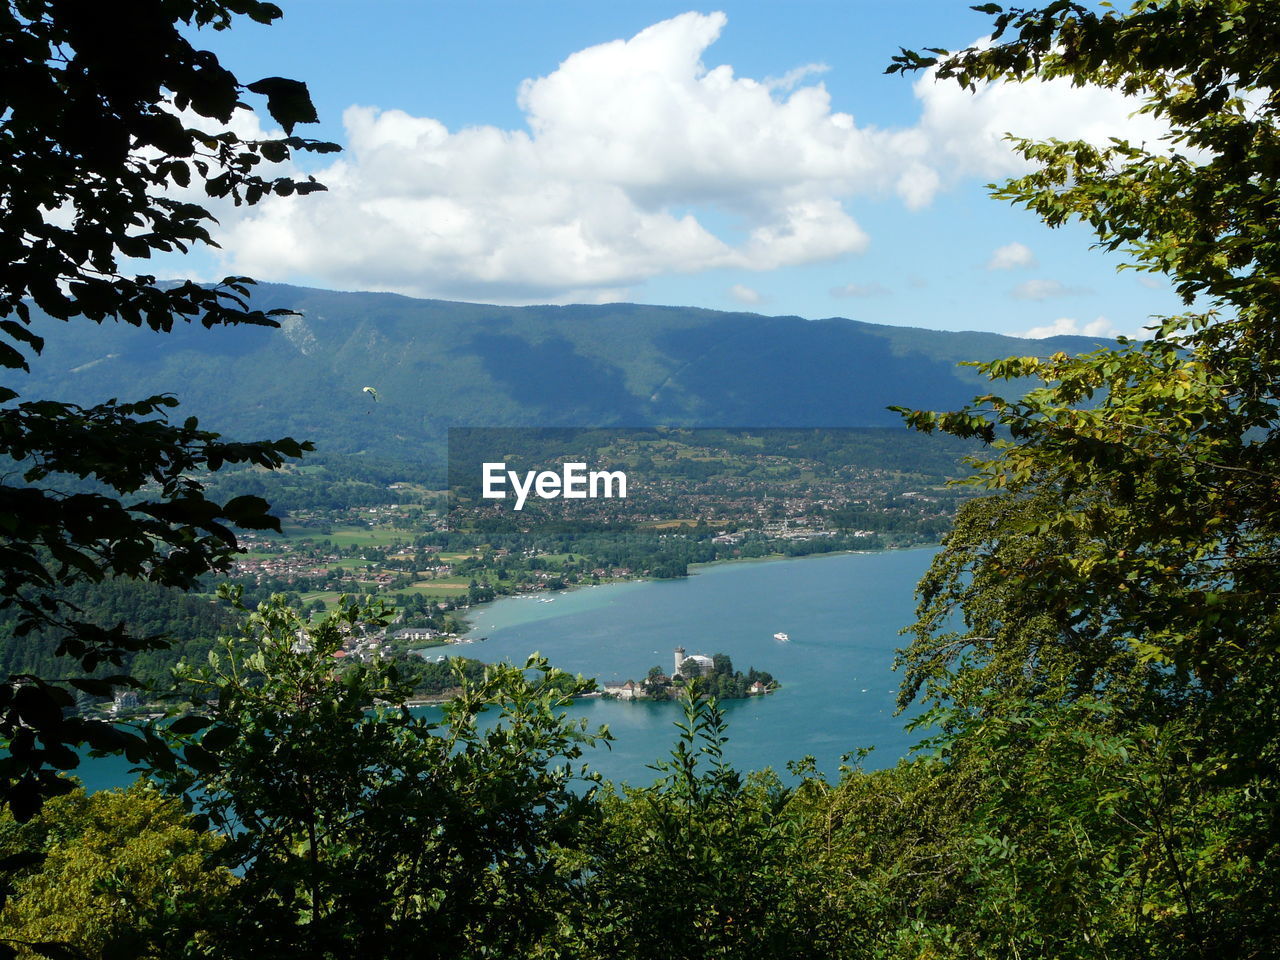 Scenic view of mountains and lake annecy seen through trees